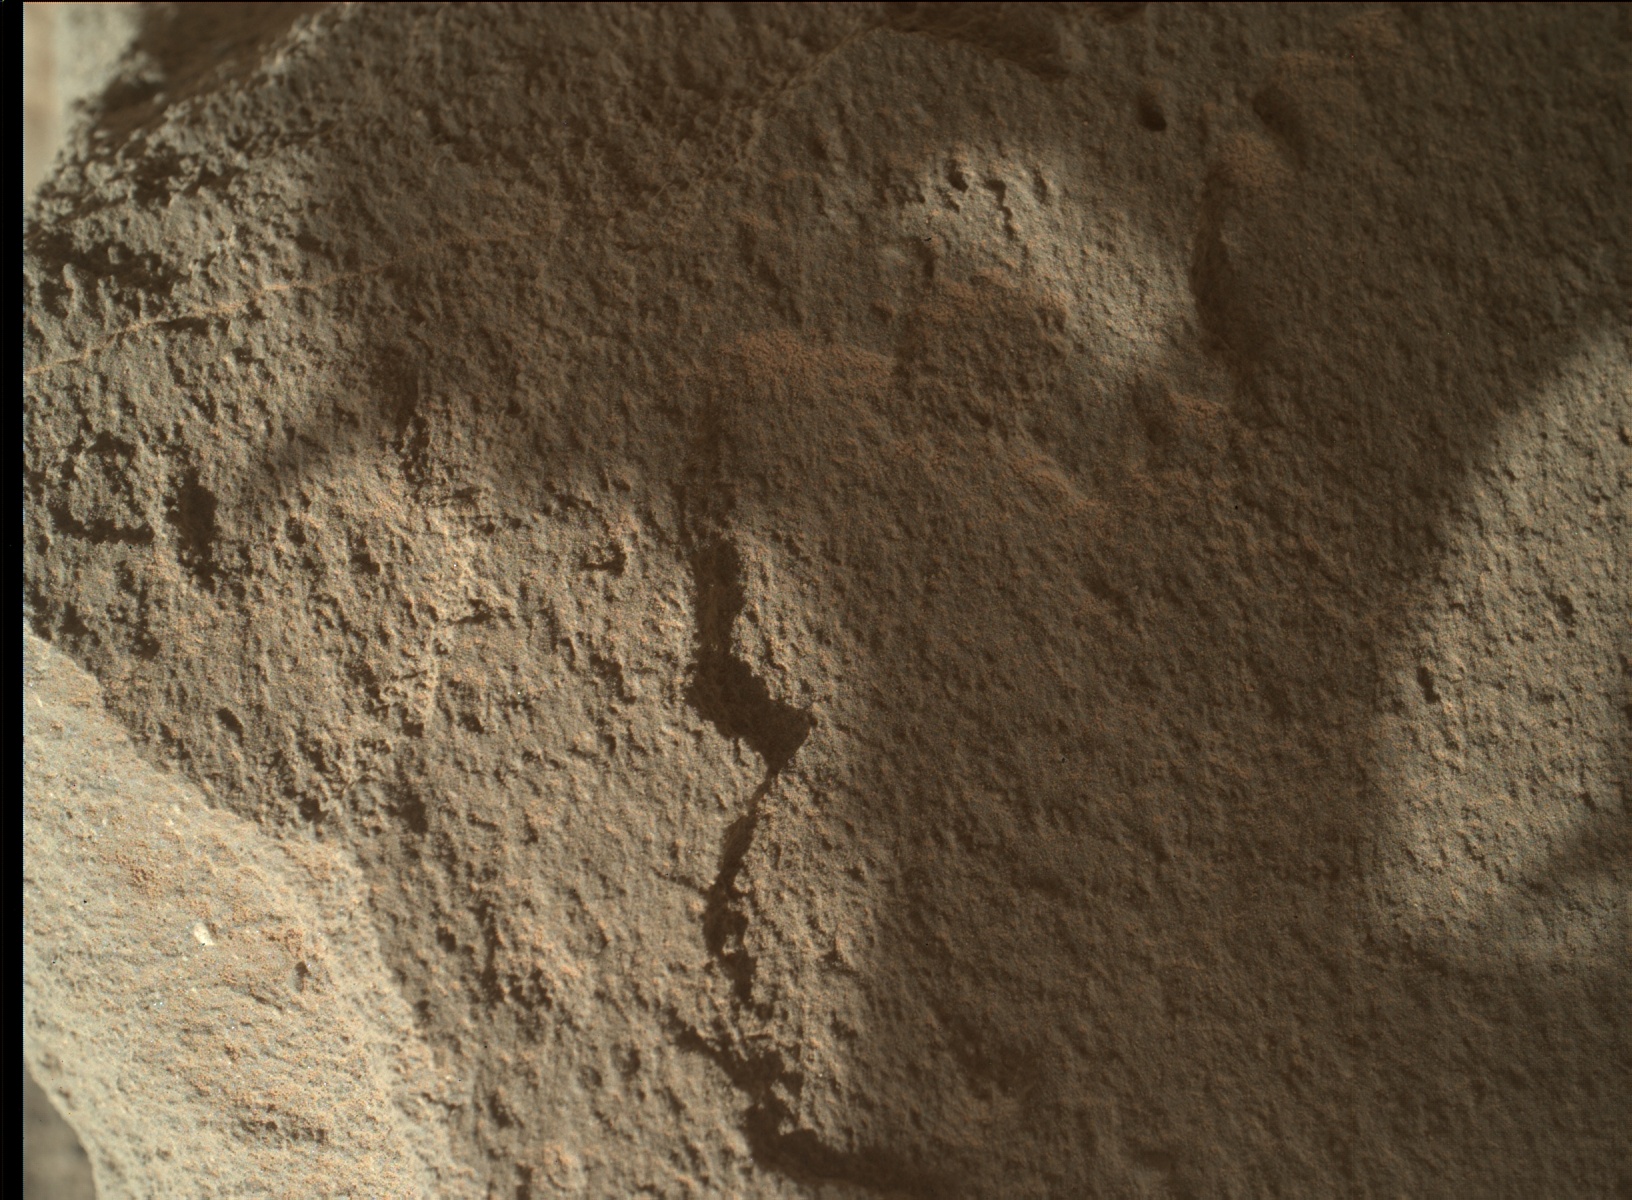 Nasa's Mars rover Curiosity acquired this image using its Mars Hand Lens Imager (MAHLI) on Sol 1313